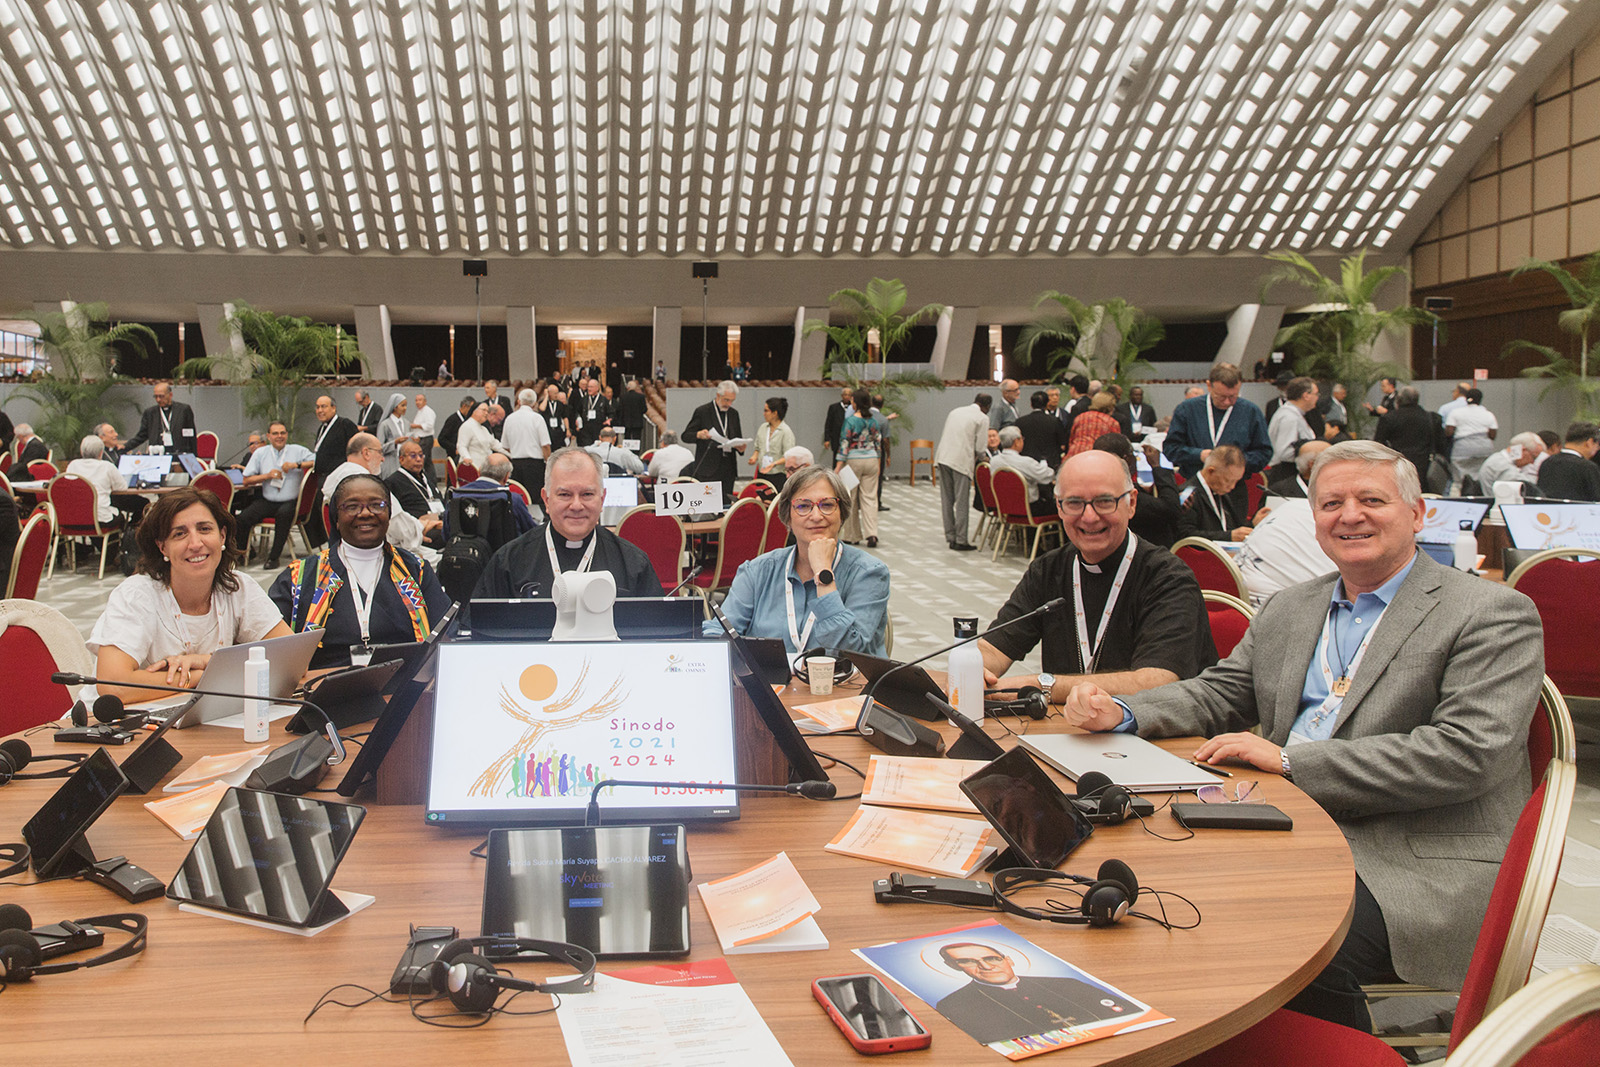 Synod on Synodality participants attend a daily session in the Paul VI Hall at the Vatican, Oct. 11, 2023. (Photo by Maria Langarica Correa)